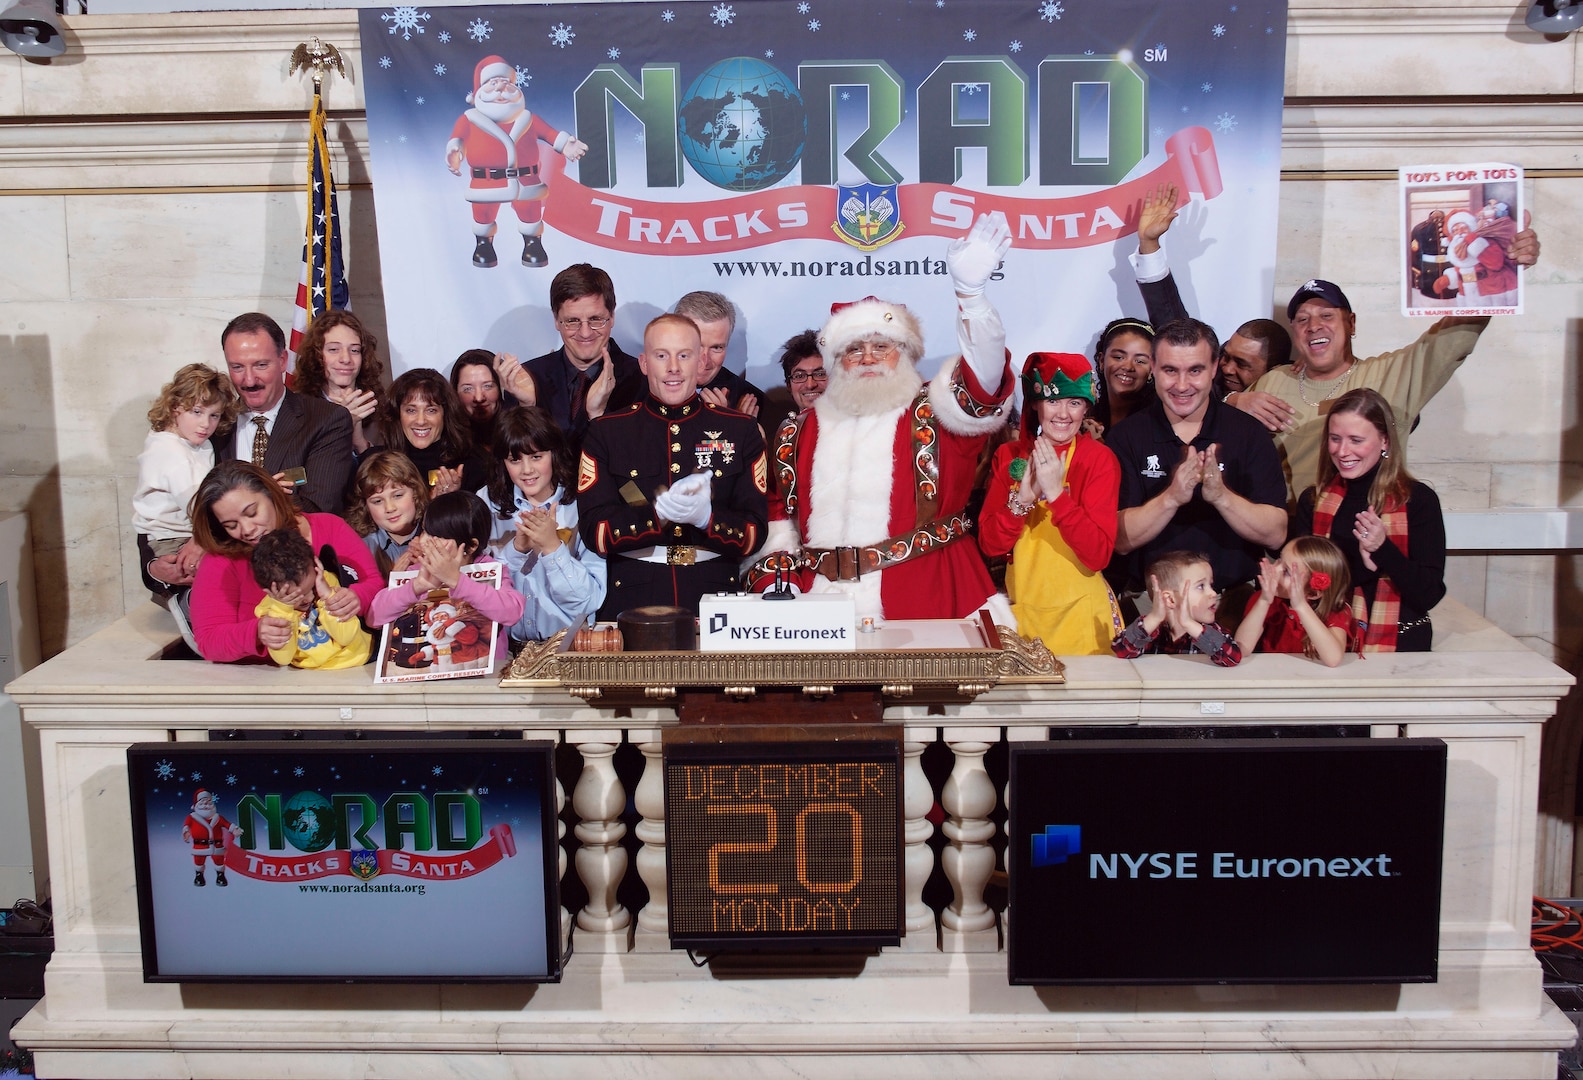 NEW YORK - NORAD Tracks Santa, Marine Toys for Tots and NTS corporate partners teamed up with Santa Claus to ring the closing bell at the New York Stock Exchange Dec. 20. Santa trackers will begin answering phones and replying to email at 2:00 a.m. MST (4:00 a.m. EST) on December 24 and will continue until 3:00 a.m. MST (5:00 a.m. EST) December 25. Children of all ages can then call the NTS toll-free number 1-877-Hi-NORAD (1-877-446-6723) or send an email to noradtrackssanta@gmail.com. 

(Photo courtesy of the New York Stock Exchange) 



